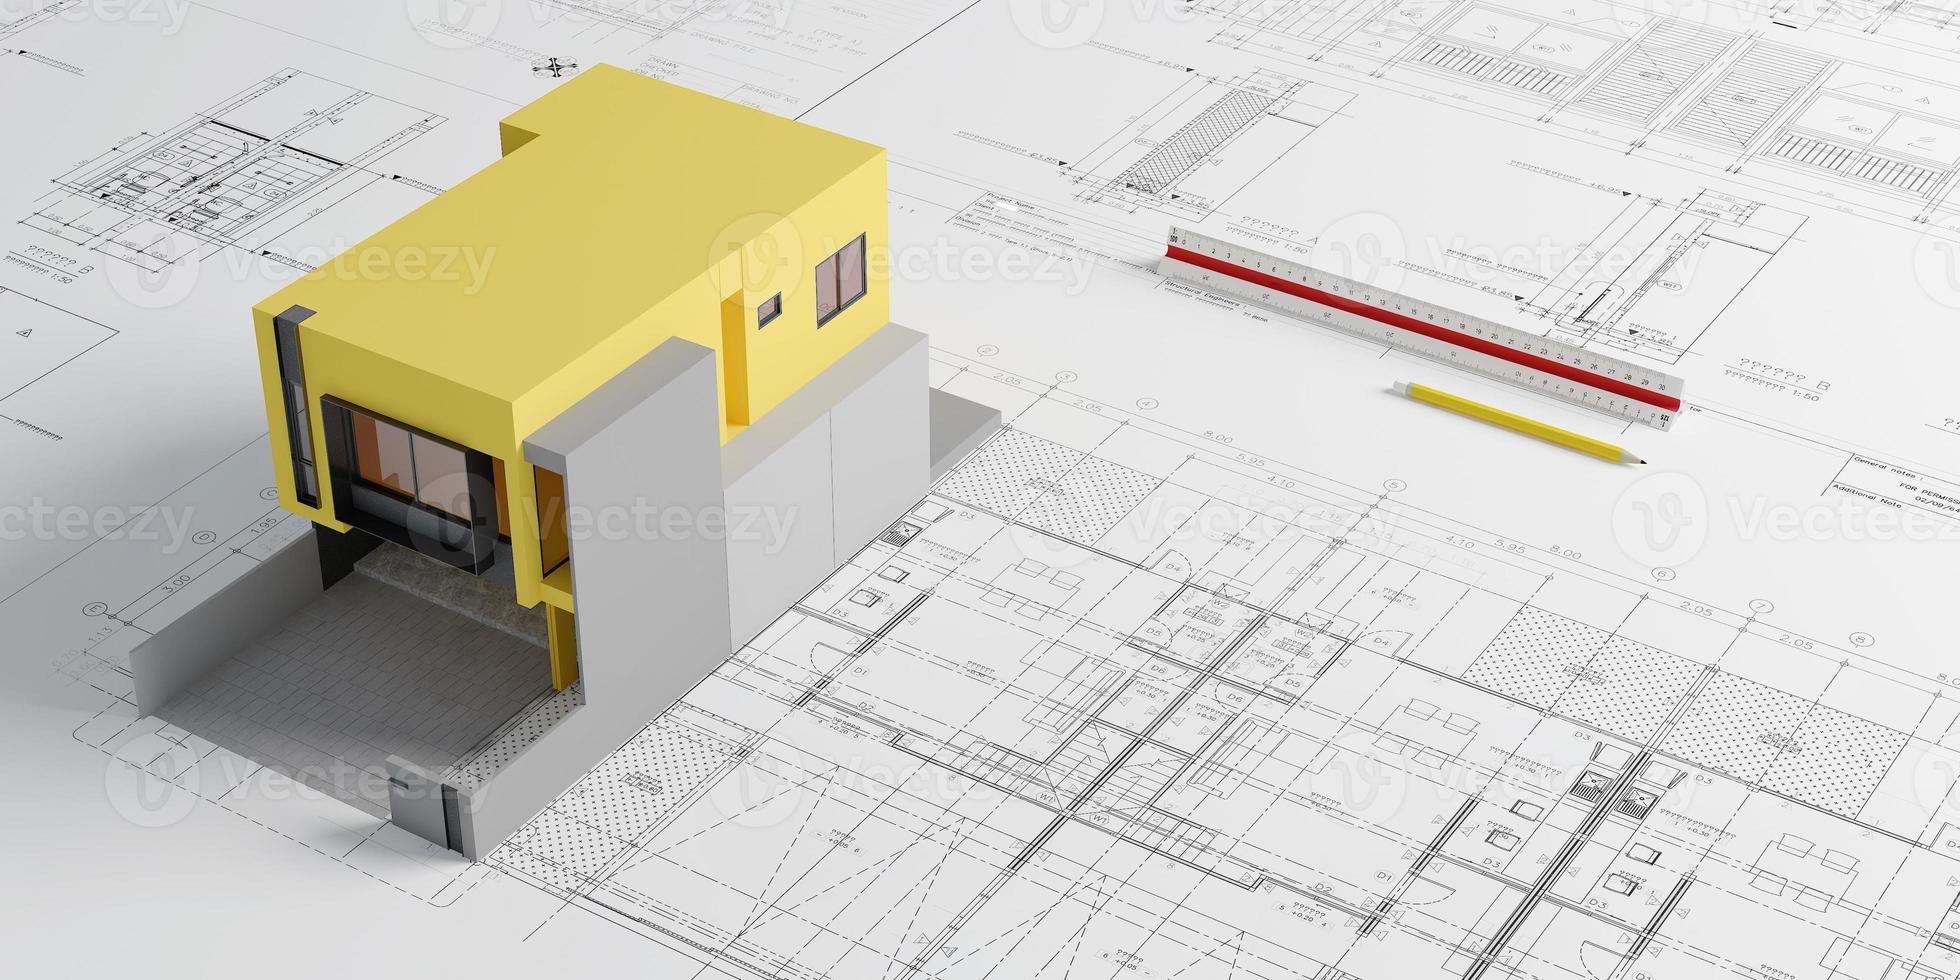 Blueprint plans and yellow house model with scale ruler and pencil.Architect concept.3d rendering photo